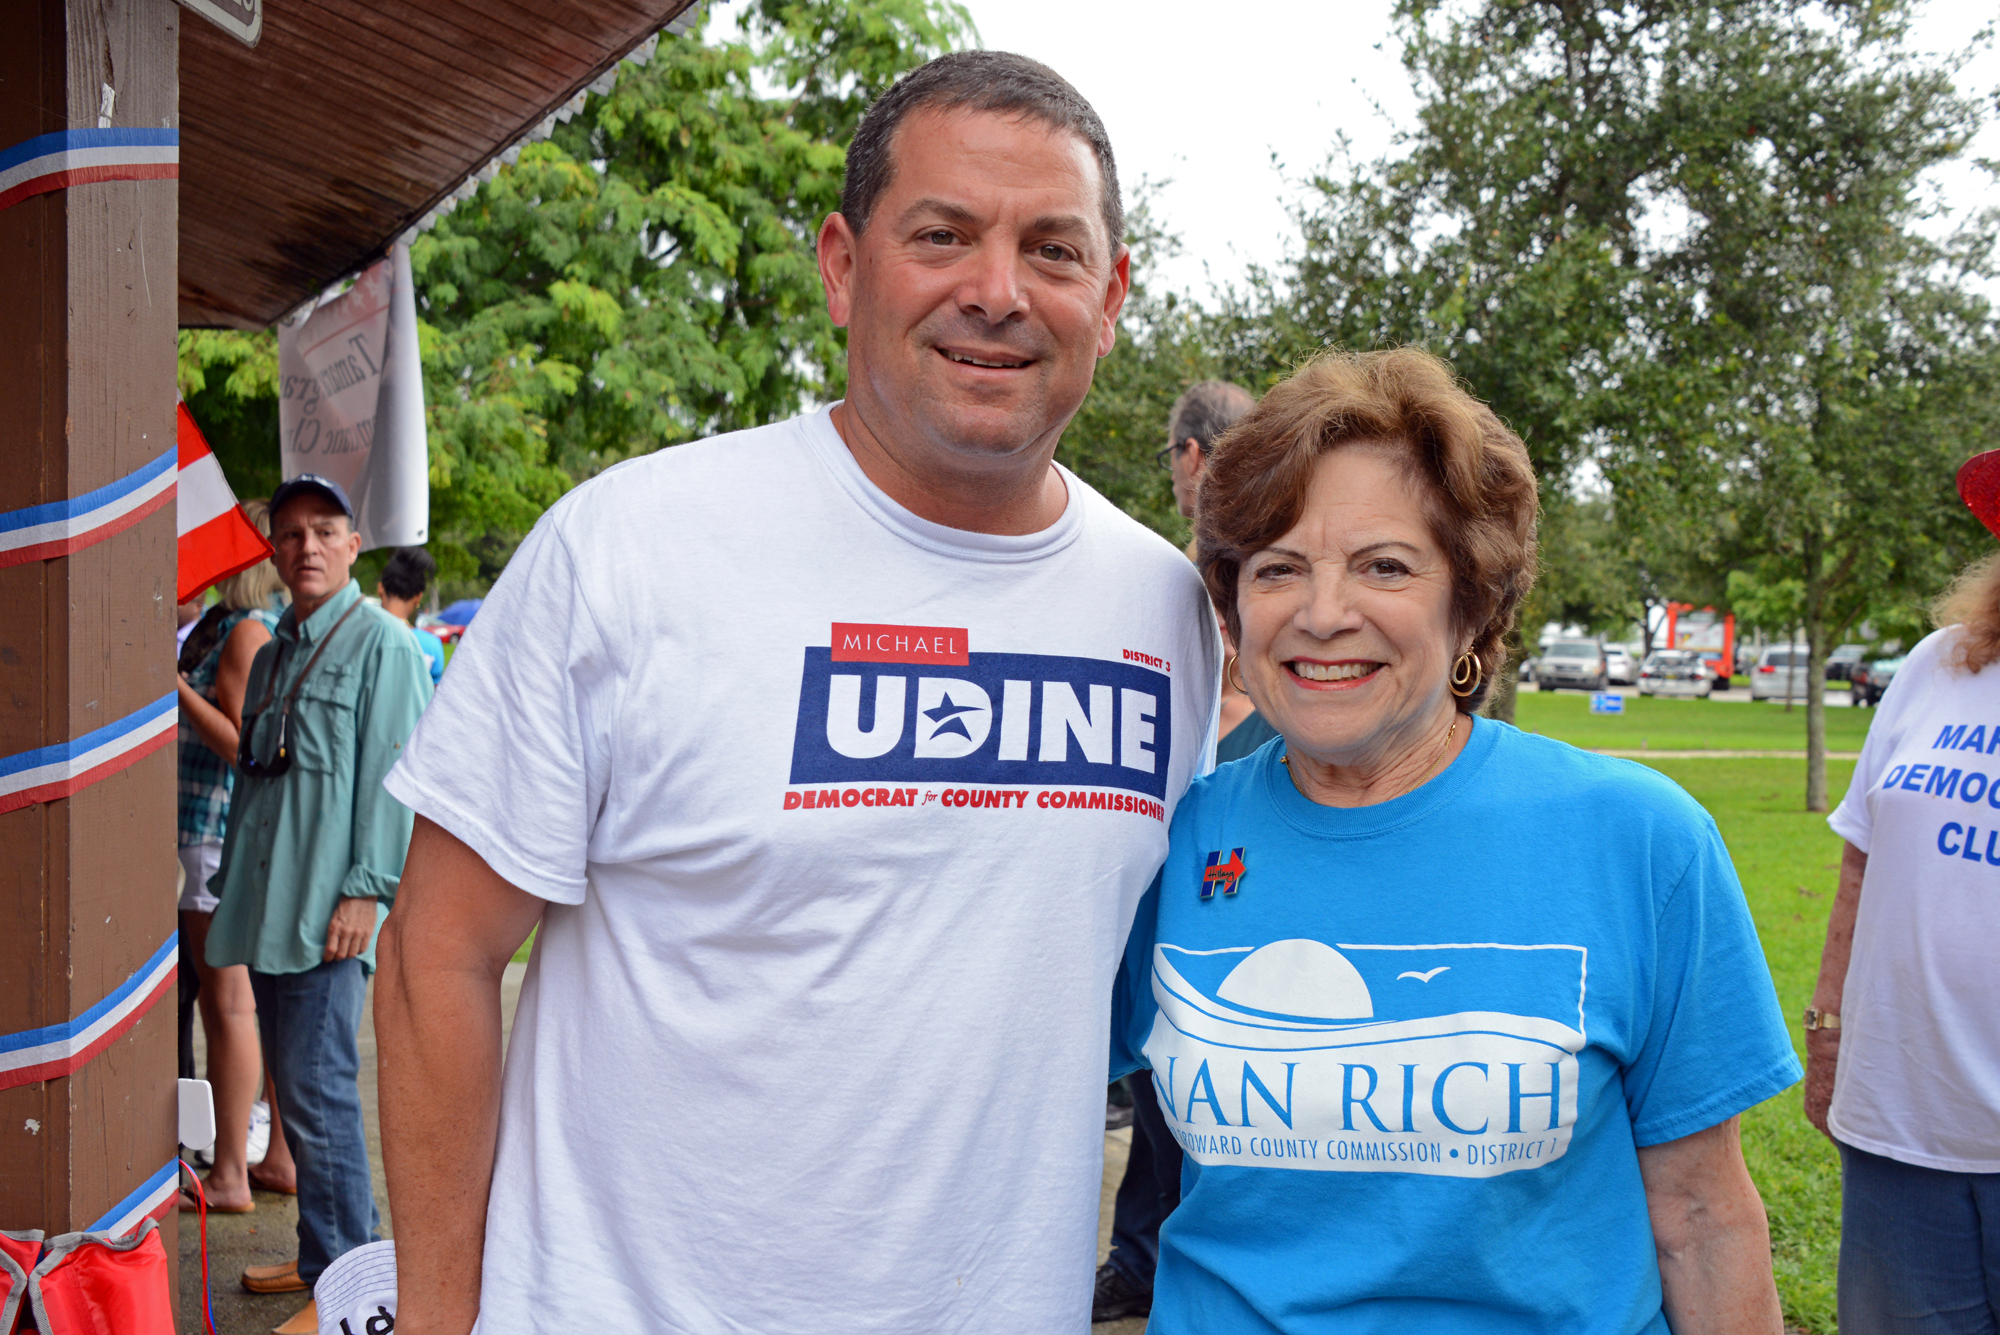 Parkland Mayor Michael Udine and newly elected Broward County Commissioner Nan Rich.